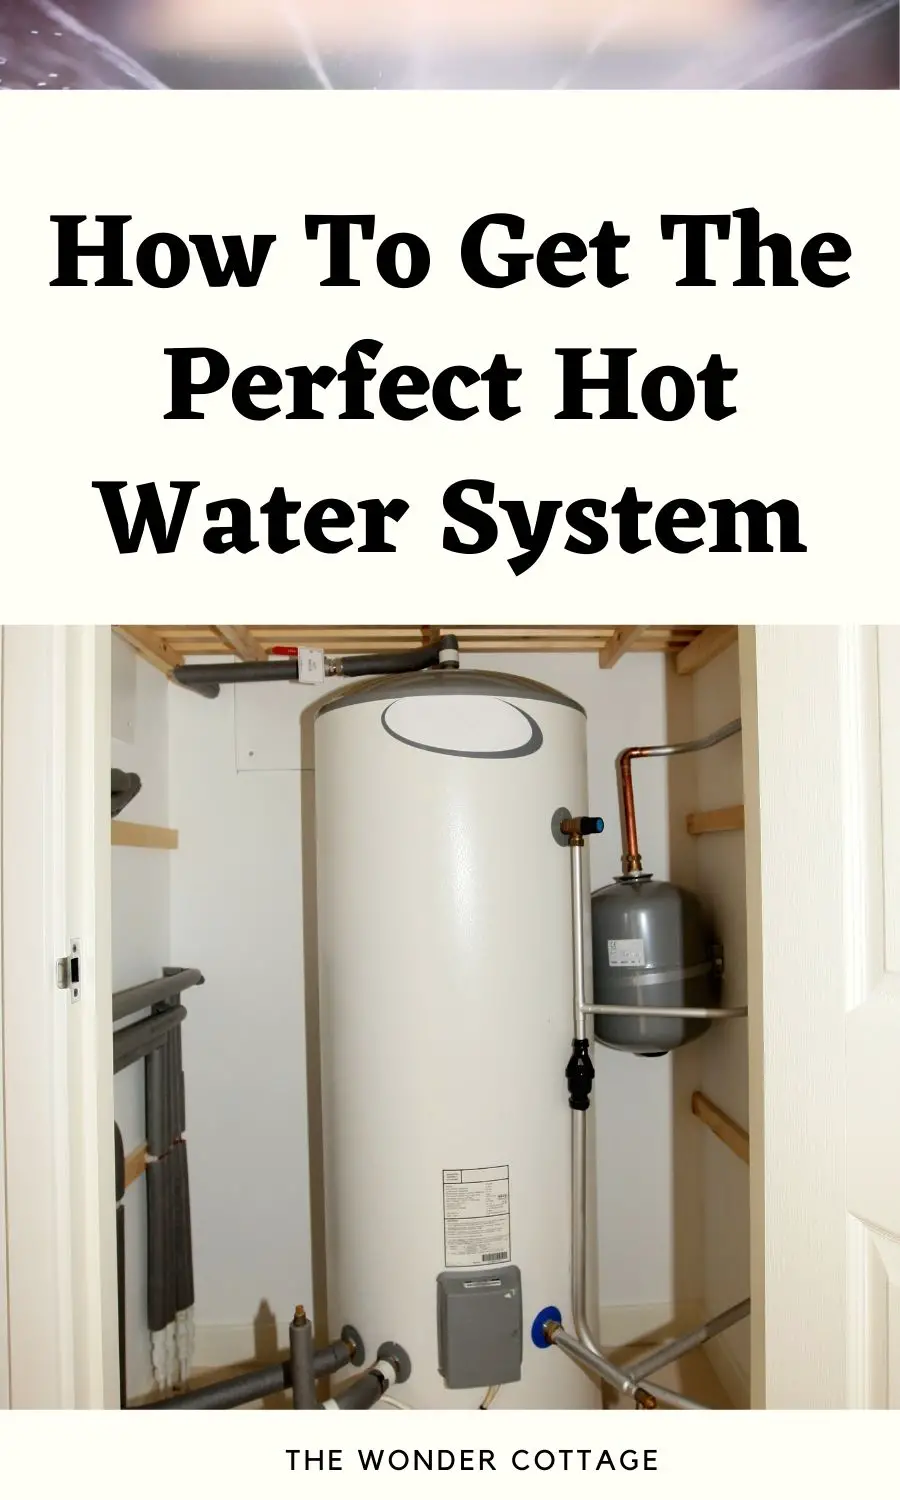 How To Get The Perfect Hot Water System